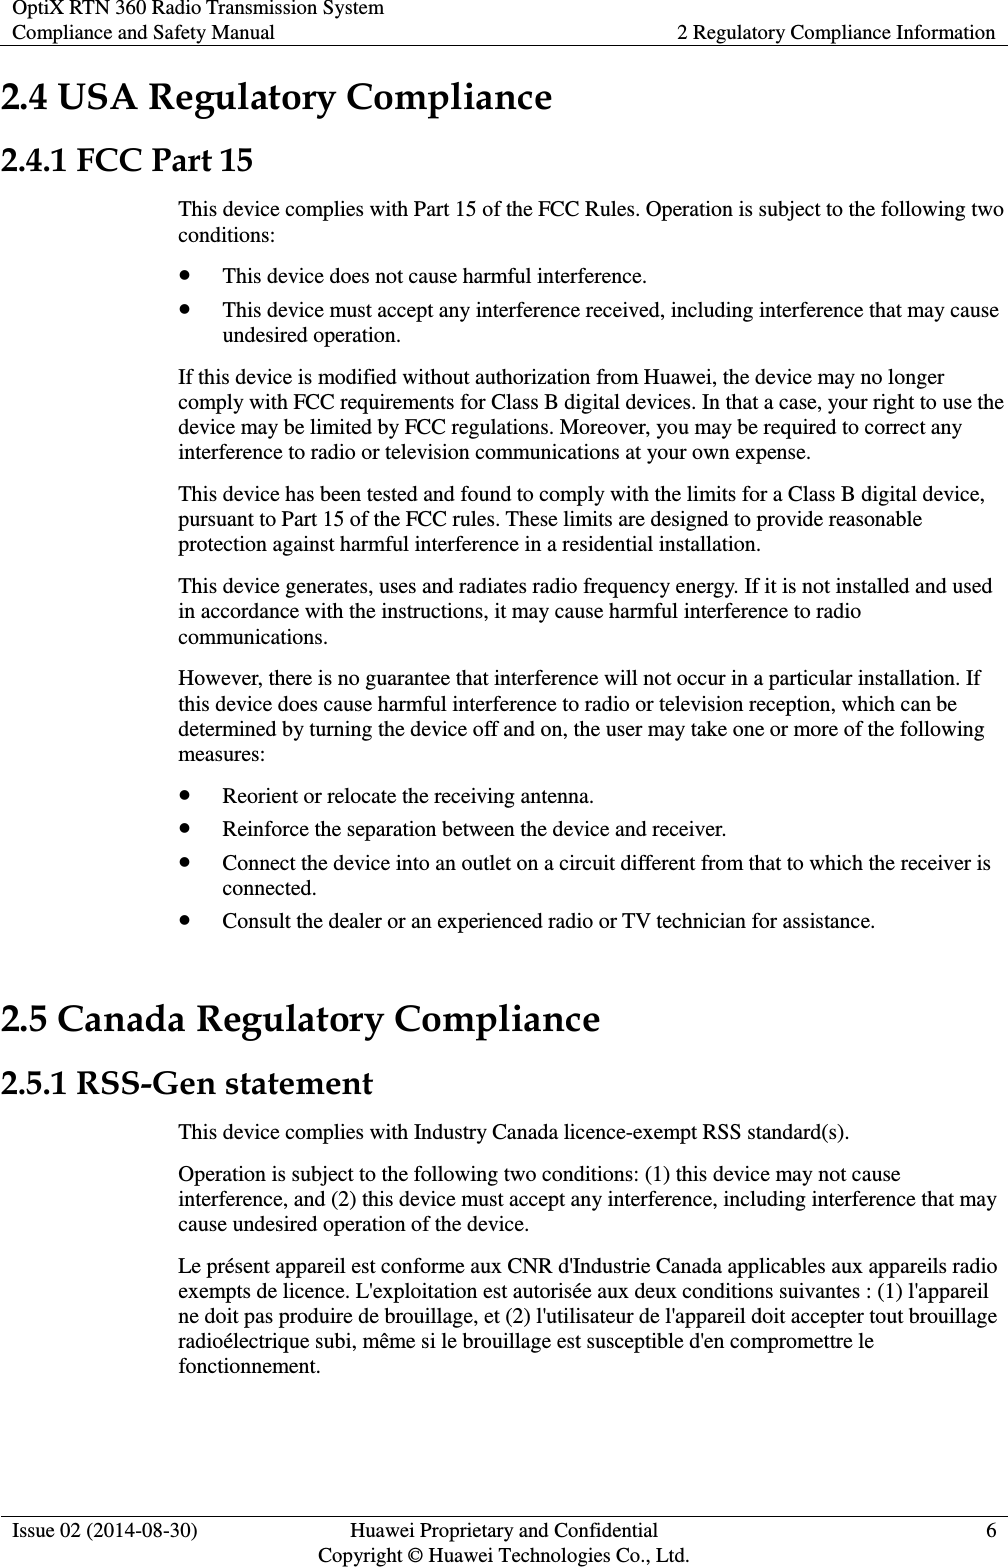 OptiX RTN 360 Radio Transmission System Compliance and Safety Manual 2 Regulatory Compliance Information  Issue 02 (2014-08-30) Huawei Proprietary and Confidential                                     Copyright © Huawei Technologies Co., Ltd. 6  2.4 USA Regulatory Compliance 2.4.1 FCC Part 15 This device complies with Part 15 of the FCC Rules. Operation is subject to the following two conditions:  This device does not cause harmful interference.  This device must accept any interference received, including interference that may cause undesired operation. If this device is modified without authorization from Huawei, the device may no longer comply with FCC requirements for Class B digital devices. In that a case, your right to use the device may be limited by FCC regulations. Moreover, you may be required to correct any interference to radio or television communications at your own expense. This device has been tested and found to comply with the limits for a Class B digital device, pursuant to Part 15 of the FCC rules. These limits are designed to provide reasonable protection against harmful interference in a residential installation. This device generates, uses and radiates radio frequency energy. If it is not installed and used in accordance with the instructions, it may cause harmful interference to radio communications. However, there is no guarantee that interference will not occur in a particular installation. If this device does cause harmful interference to radio or television reception, which can be determined by turning the device off and on, the user may take one or more of the following measures:  Reorient or relocate the receiving antenna.  Reinforce the separation between the device and receiver.  Connect the device into an outlet on a circuit different from that to which the receiver is connected.  Consult the dealer or an experienced radio or TV technician for assistance. 2.5 Canada Regulatory Compliance 2.5.1 RSS-Gen statement This device complies with Industry Canada licence-exempt RSS standard(s). Operation is subject to the following two conditions: (1) this device may not cause interference, and (2) this device must accept any interference, including interference that may cause undesired operation of the device. Le présent appareil est conforme aux CNR d&apos;Industrie Canada applicables aux appareils radio exempts de licence. L&apos;exploitation est autorisée aux deux conditions suivantes : (1) l&apos;appareil ne doit pas produire de brouillage, et (2) l&apos;utilisateur de l&apos;appareil doit accepter tout brouillage radioélectrique subi, même si le brouillage est susceptible d&apos;en compromettre le fonctionnement. 